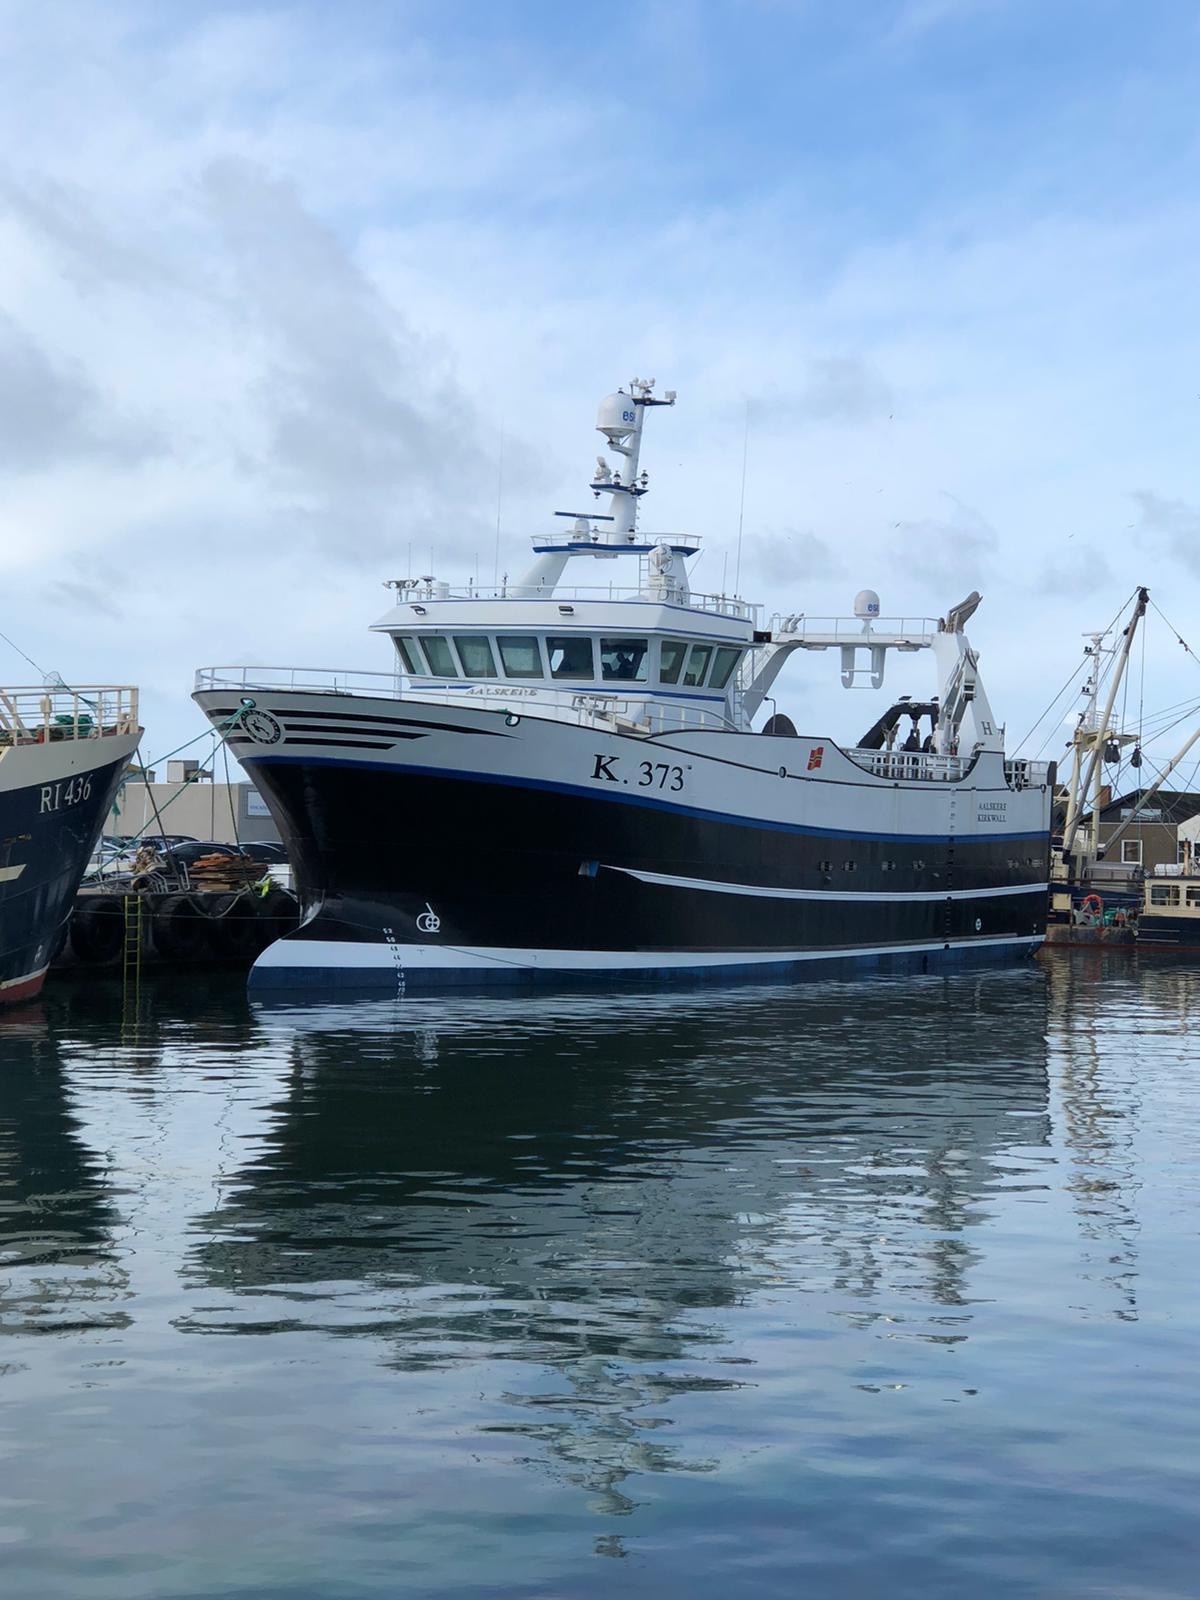 Skelwick LLP sets sail with new vessel thanks to RBS funding package